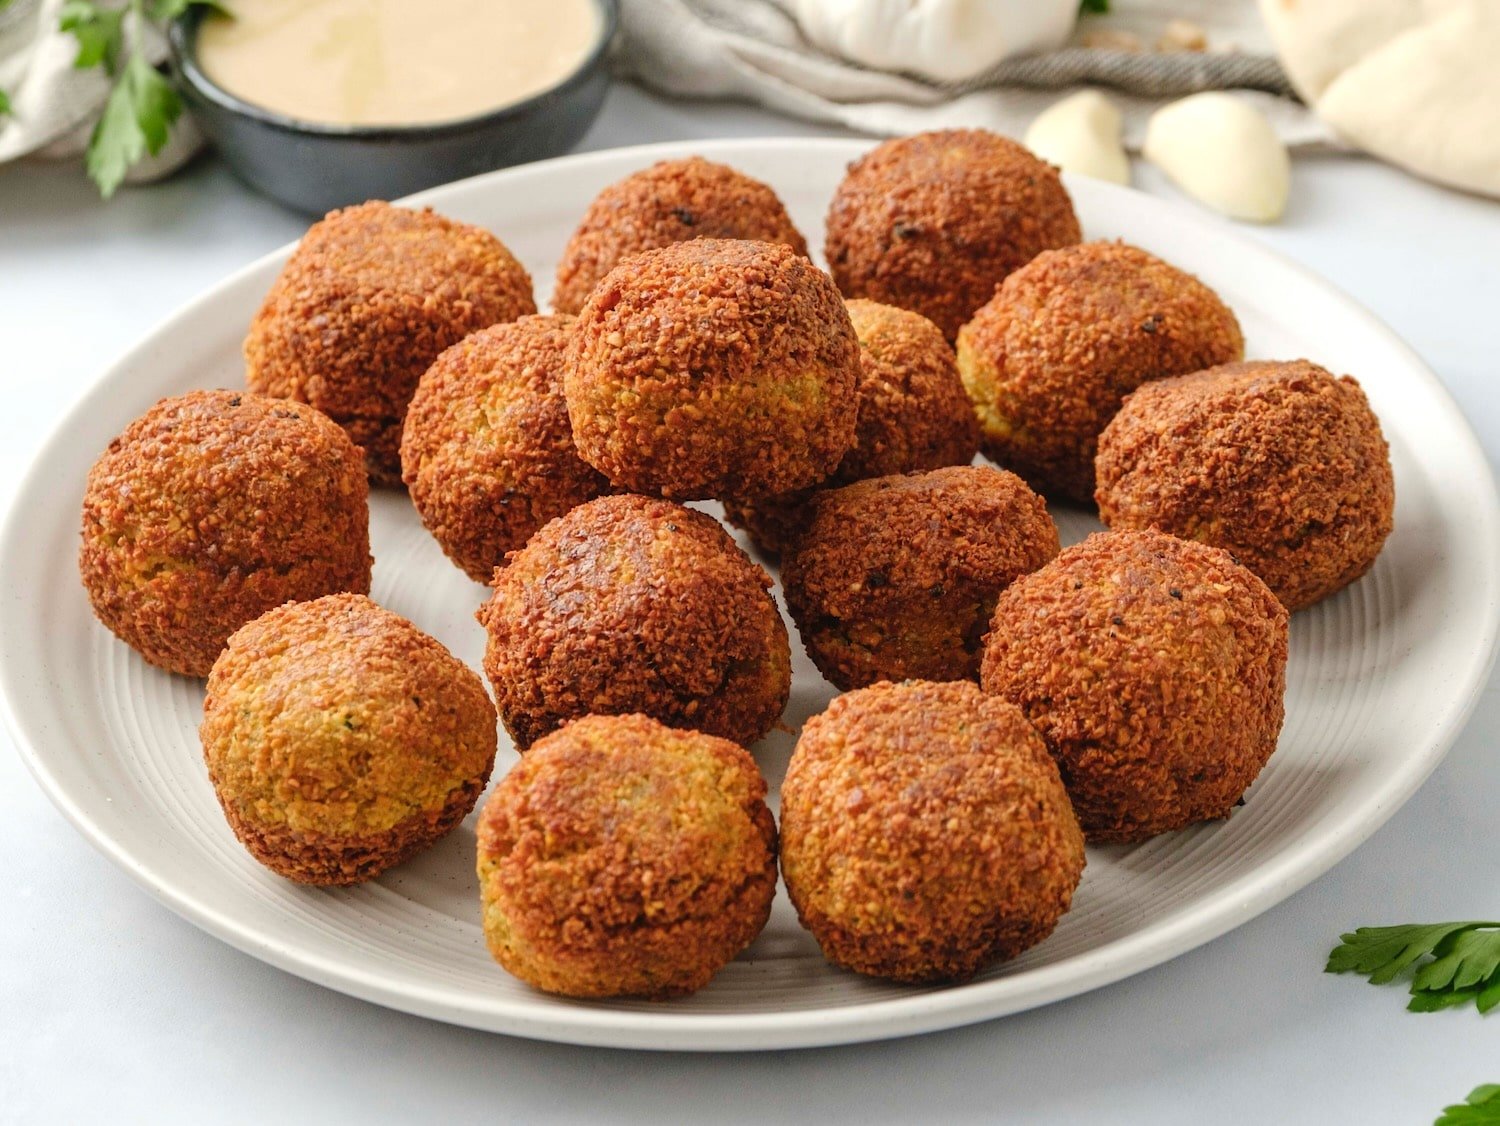 Horizontal image of a white plate filled with falafel balls. A bowl of tahini sauce, fresh herbs, a head of garlic, and pita bread sit in the background.